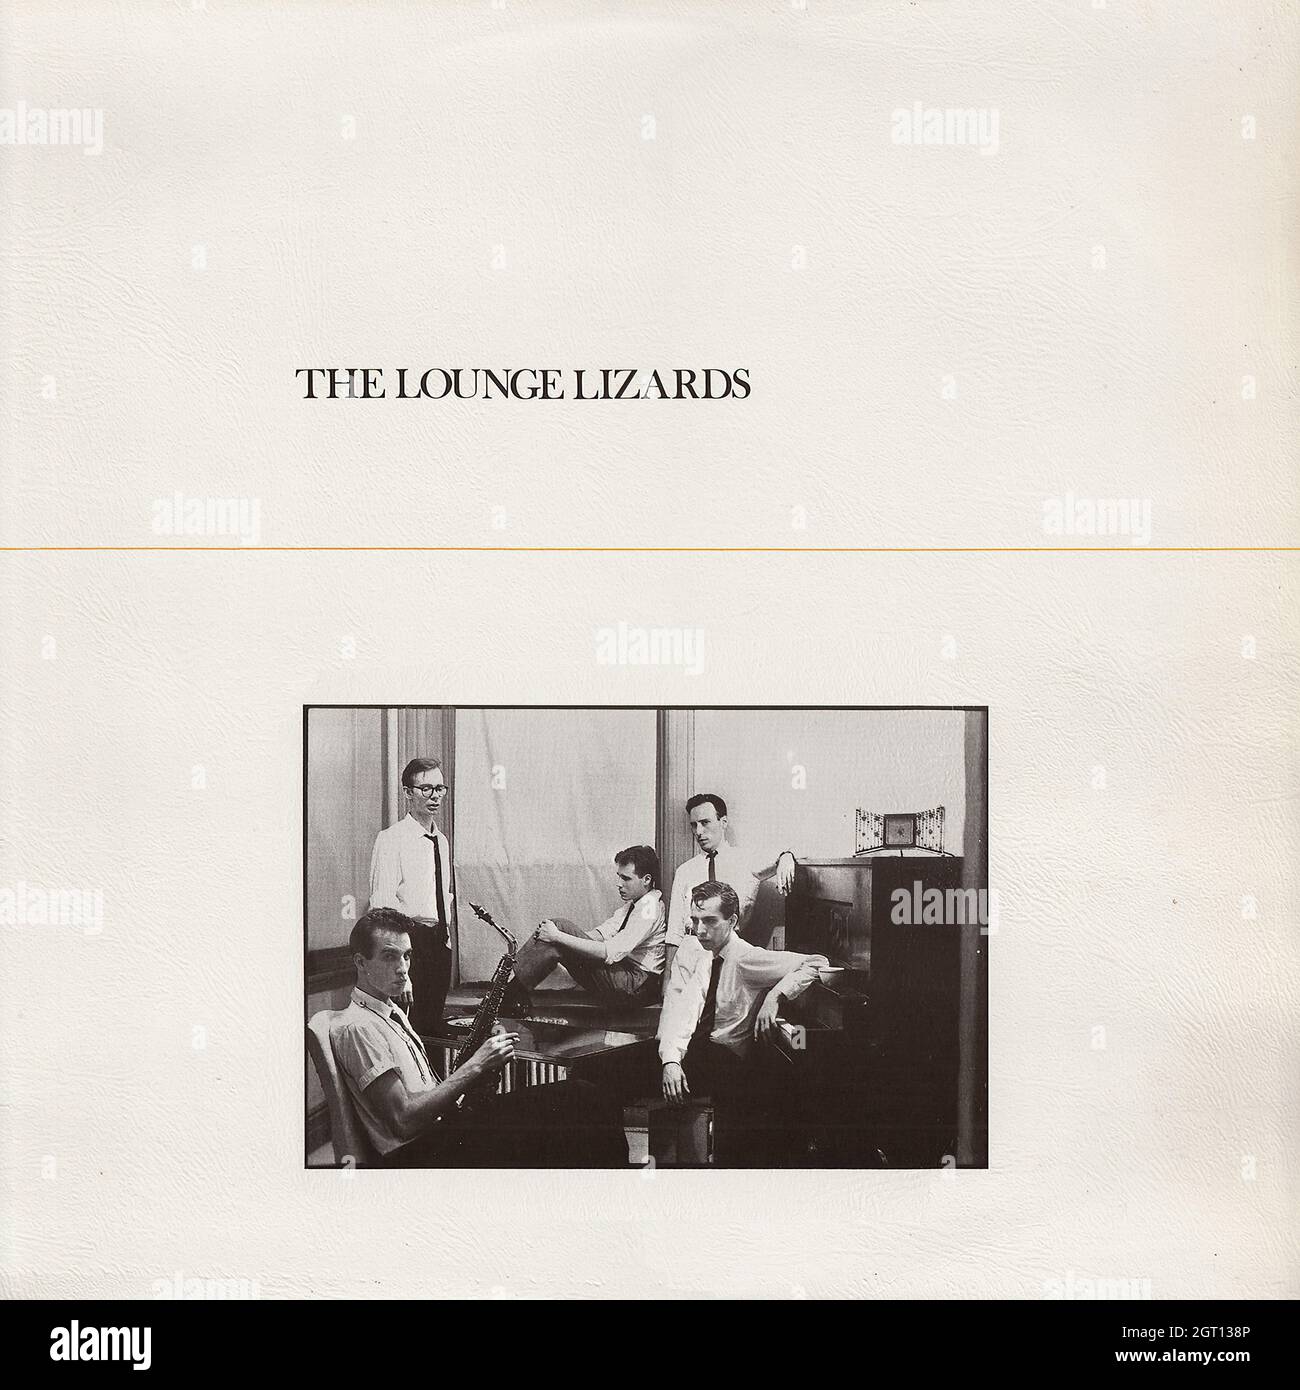 The Lounge Lizards - The Lounge Lizards - Vintage Vinyl Record Cover Stock Photo